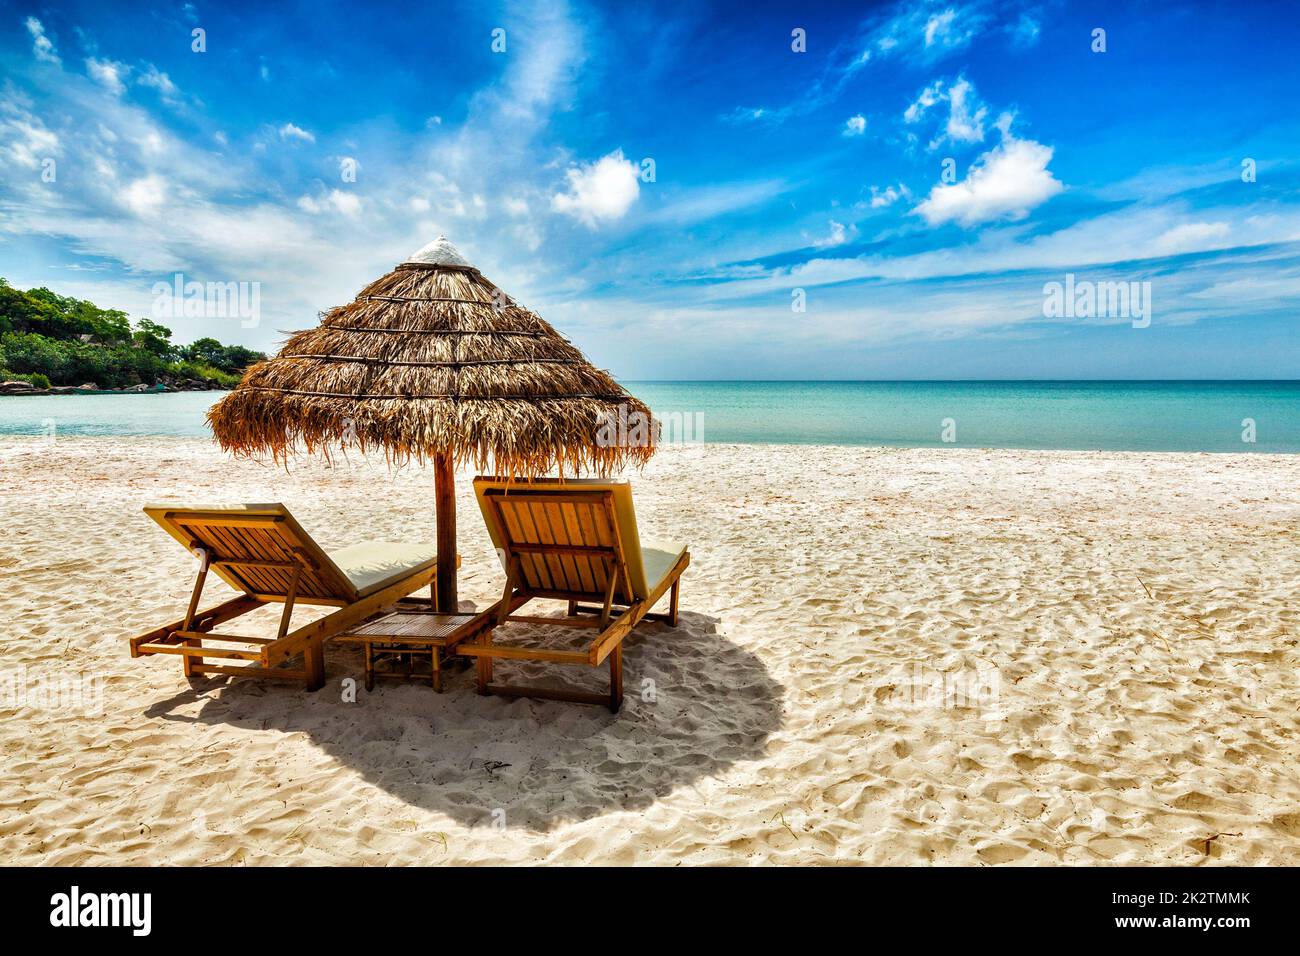 Two lounge chairs under tent on beach Stock Photo